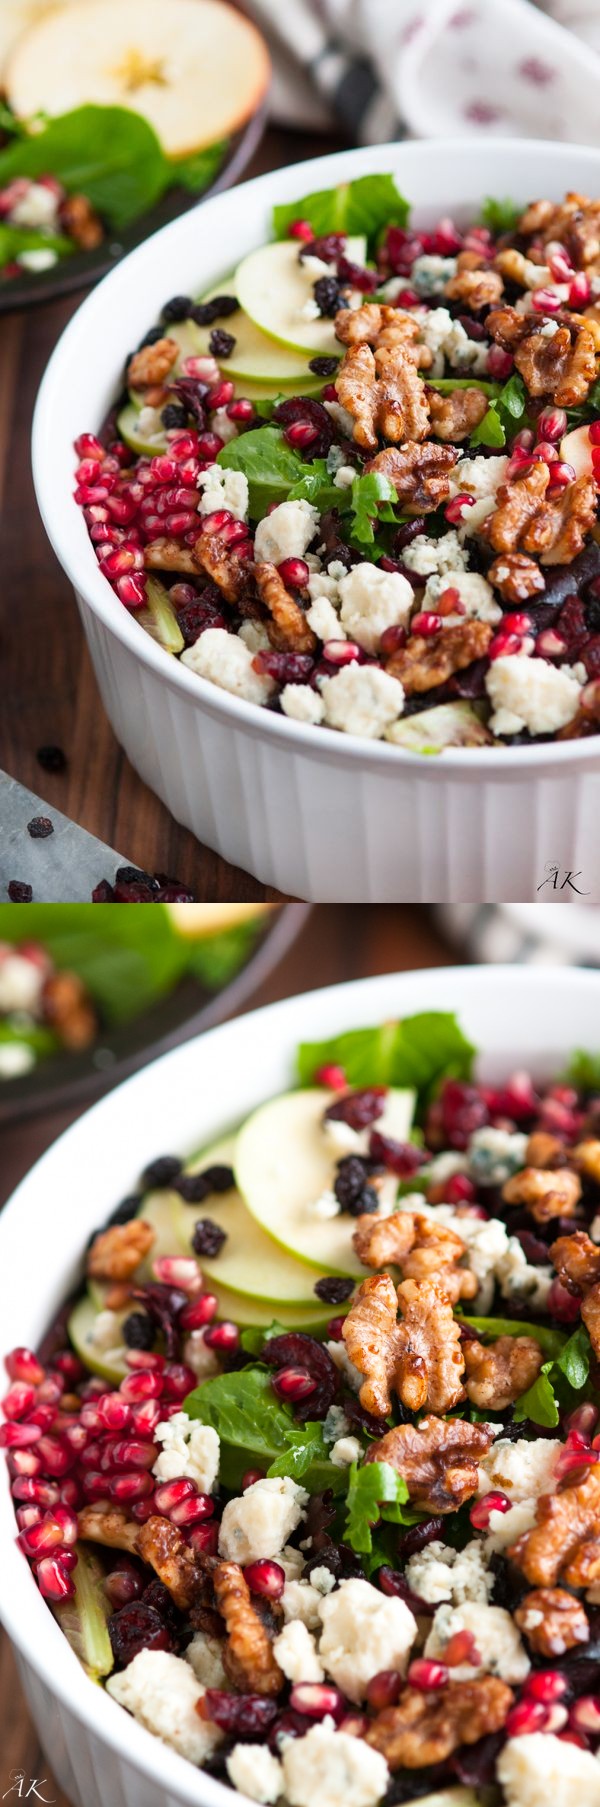 Autumn Apple and Pomegranate Salad with Homemade Candied Walnuts